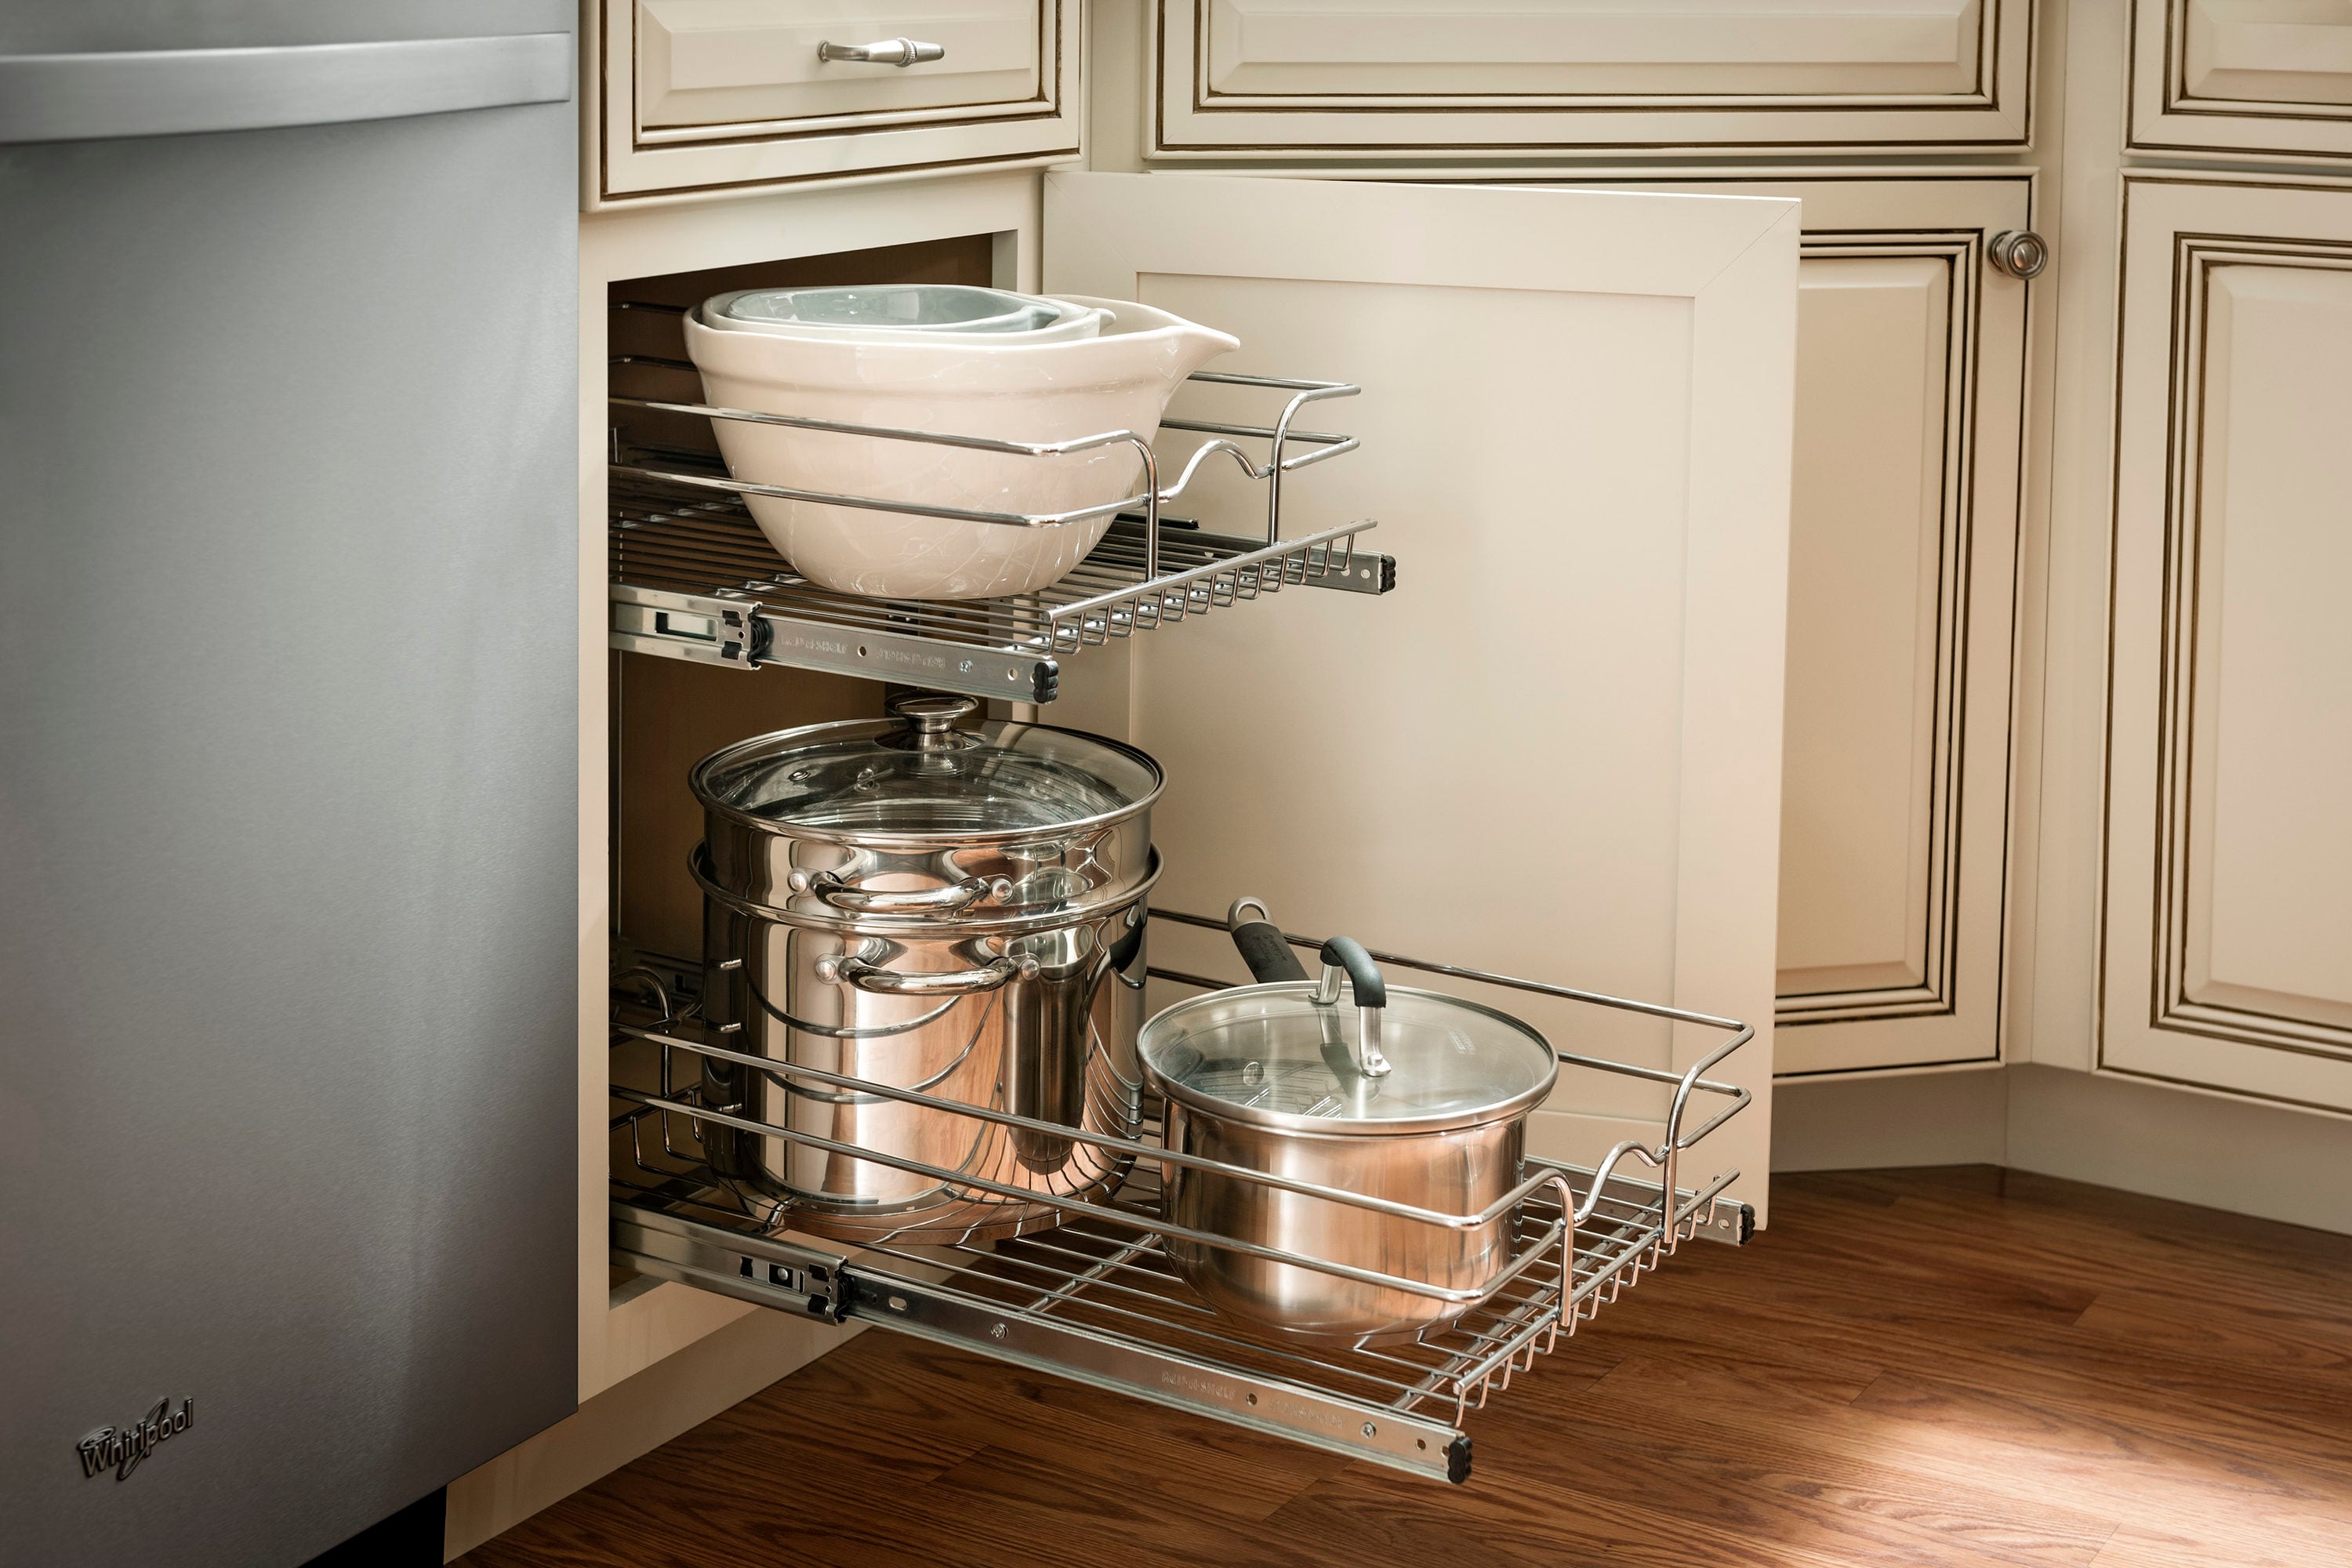 Side Mount Kitchen Base Cabinet Pull-Out Organizers by Rev-A-Shelf